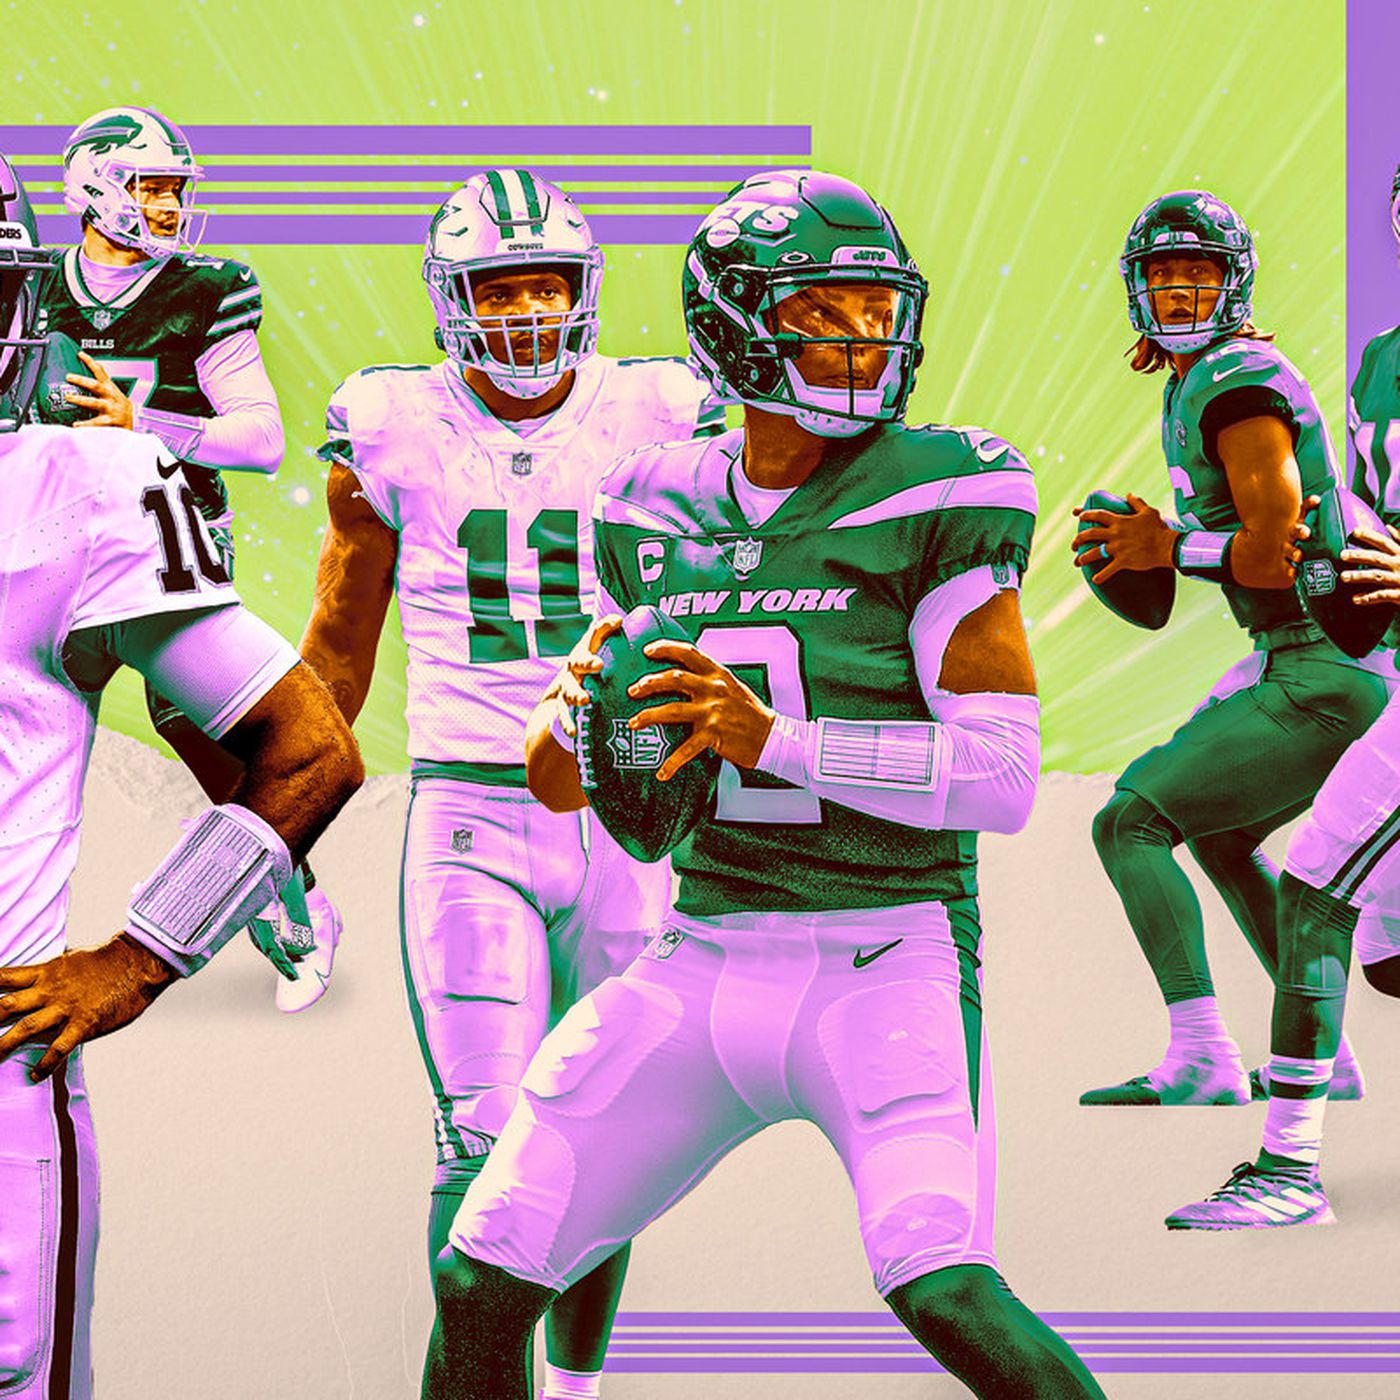 NFL odds, picks, predictions for Week 3: Expert model projects Jets,  Vikings upsets over Patriots, Chargers